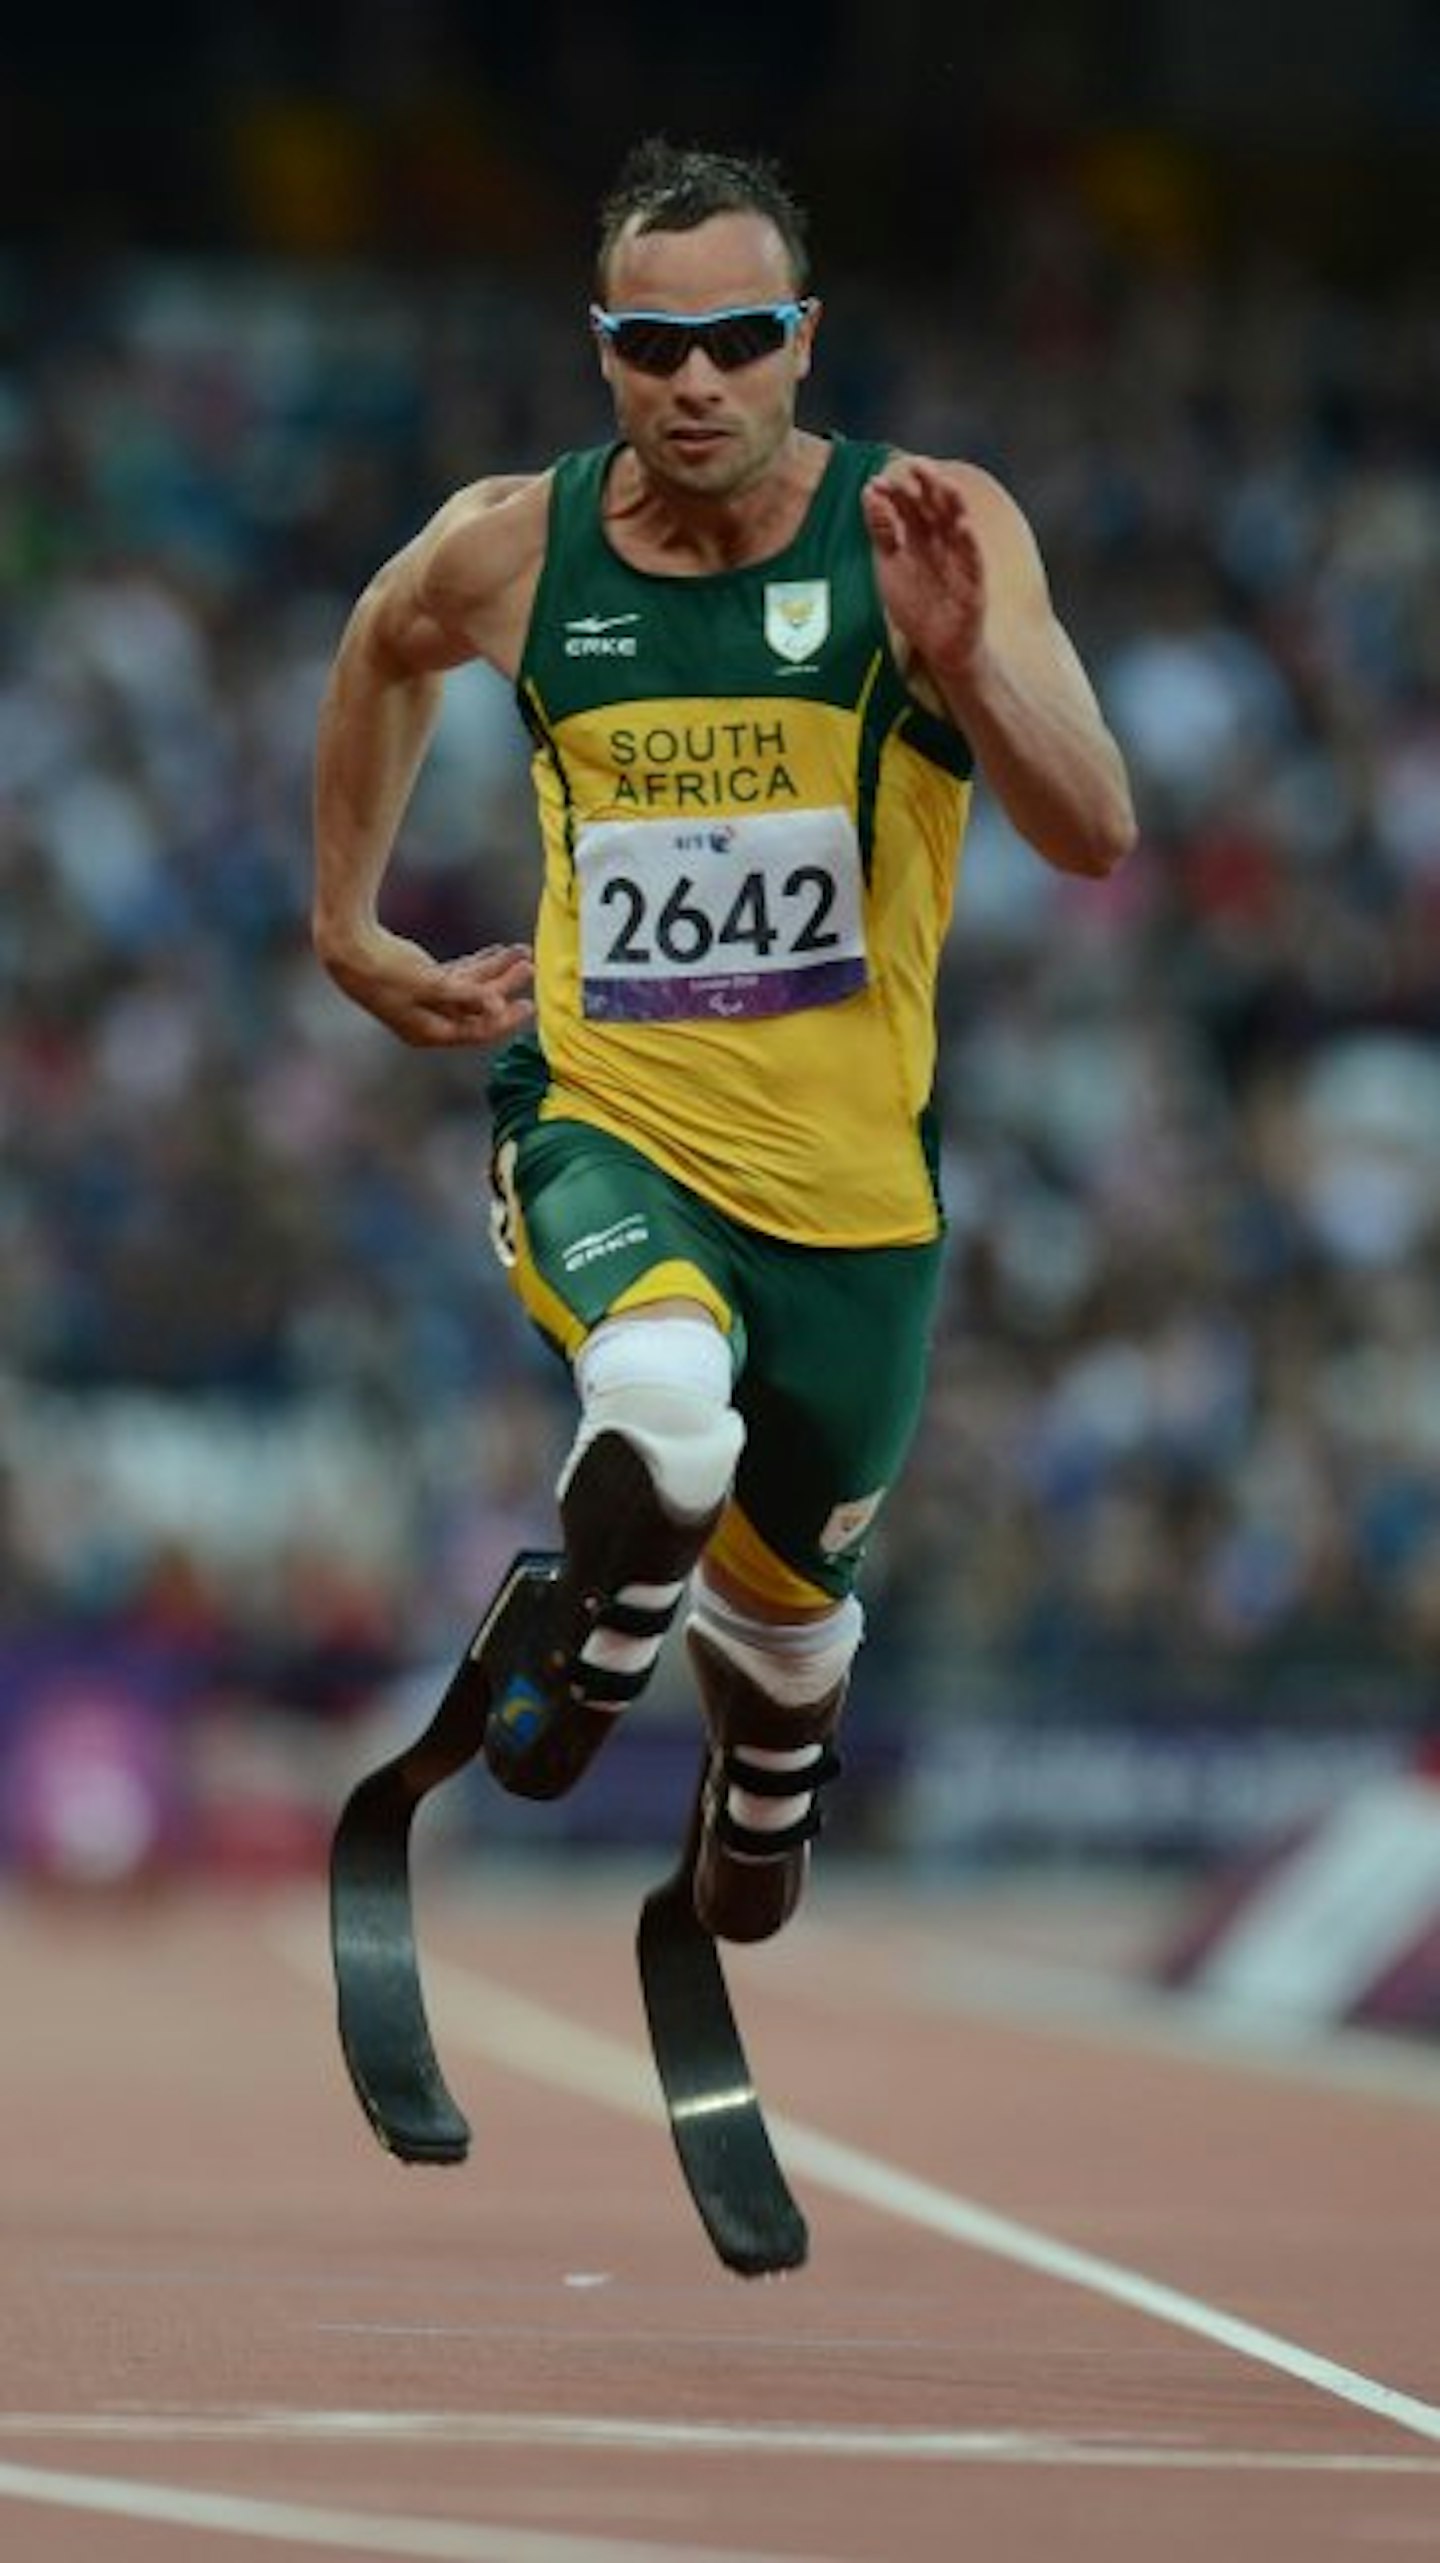 Oscar competing in the 2012 Paralympics, before the tragic incident